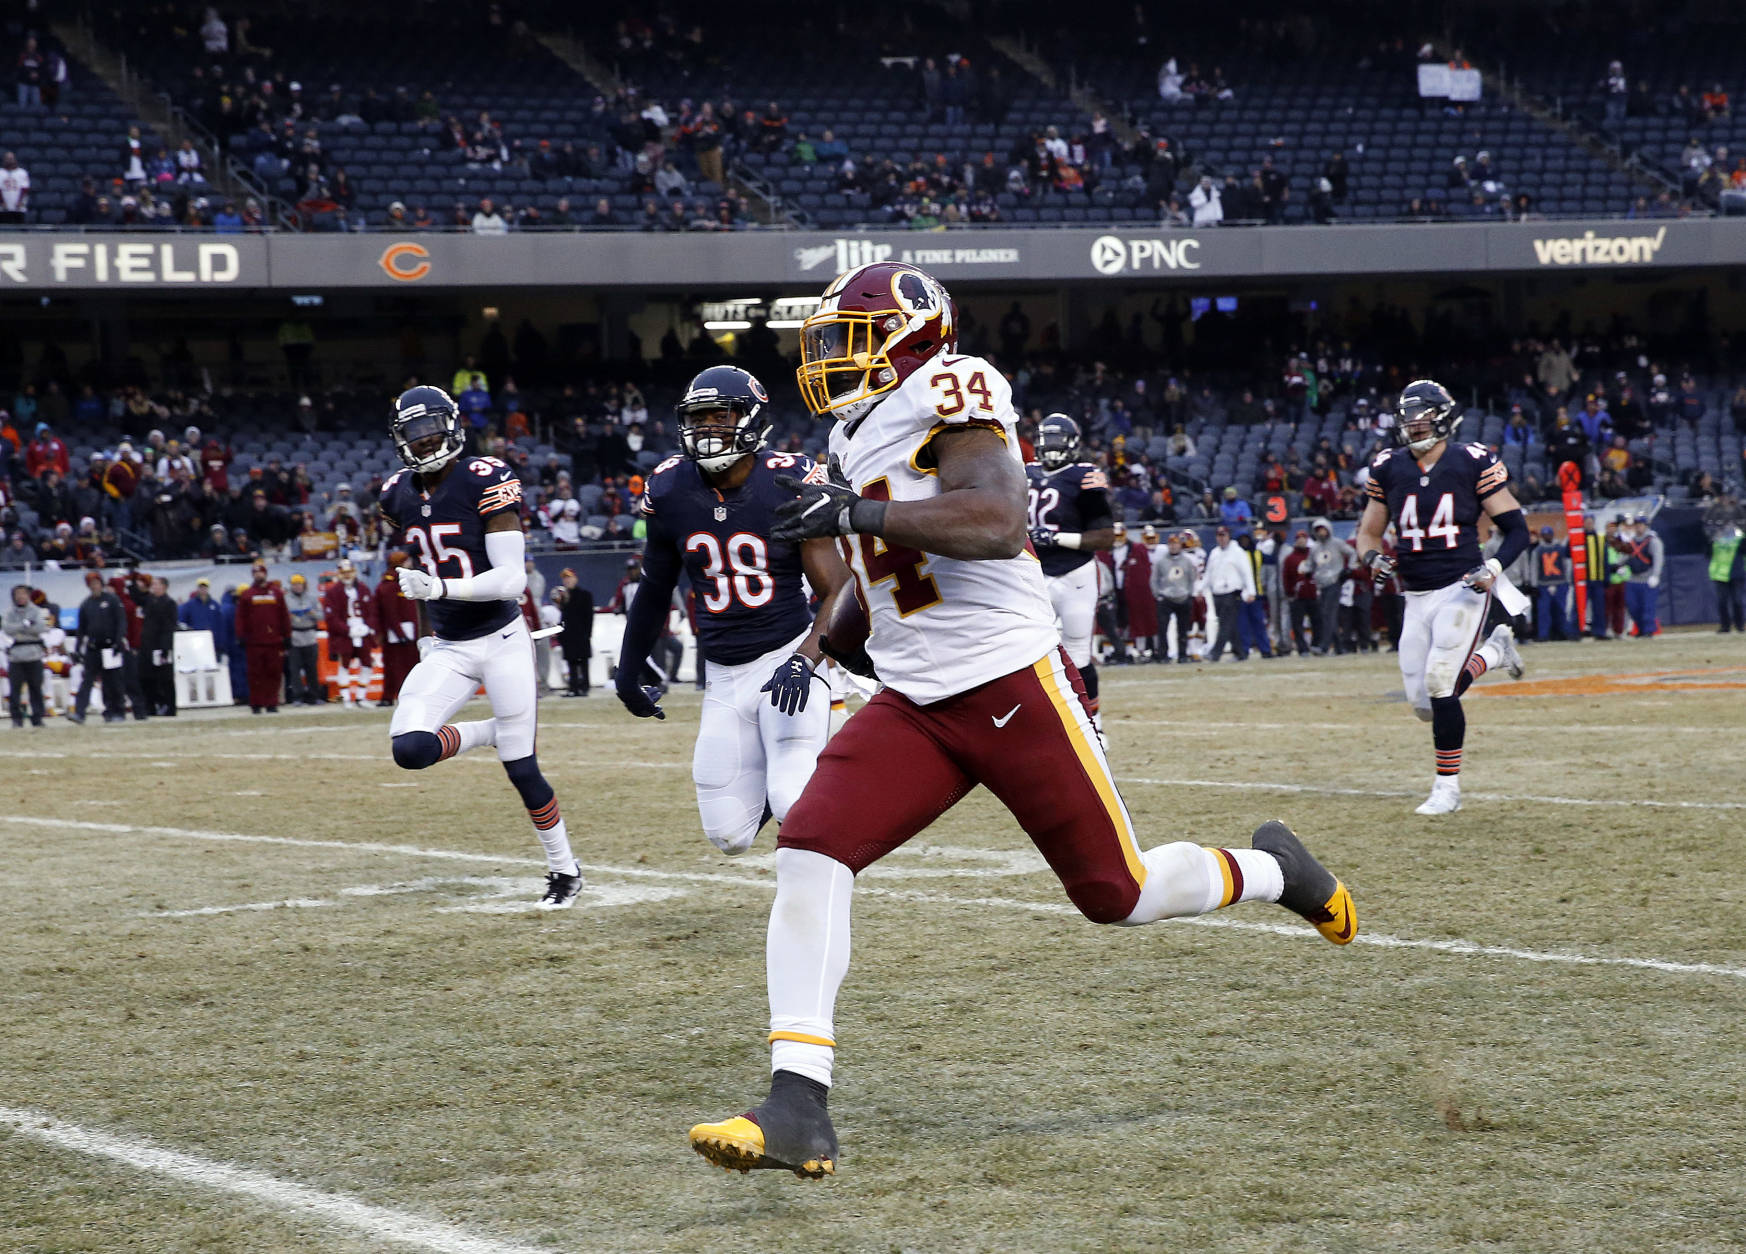 Washington Redskins running back Mack Brown (34) runs for a 61-yard touchdown against the Chicago Bears during the second half of an NFL football game, Saturday, Dec. 24, 2016, in Chicago. (AP Photo/Nam Y. Huh)